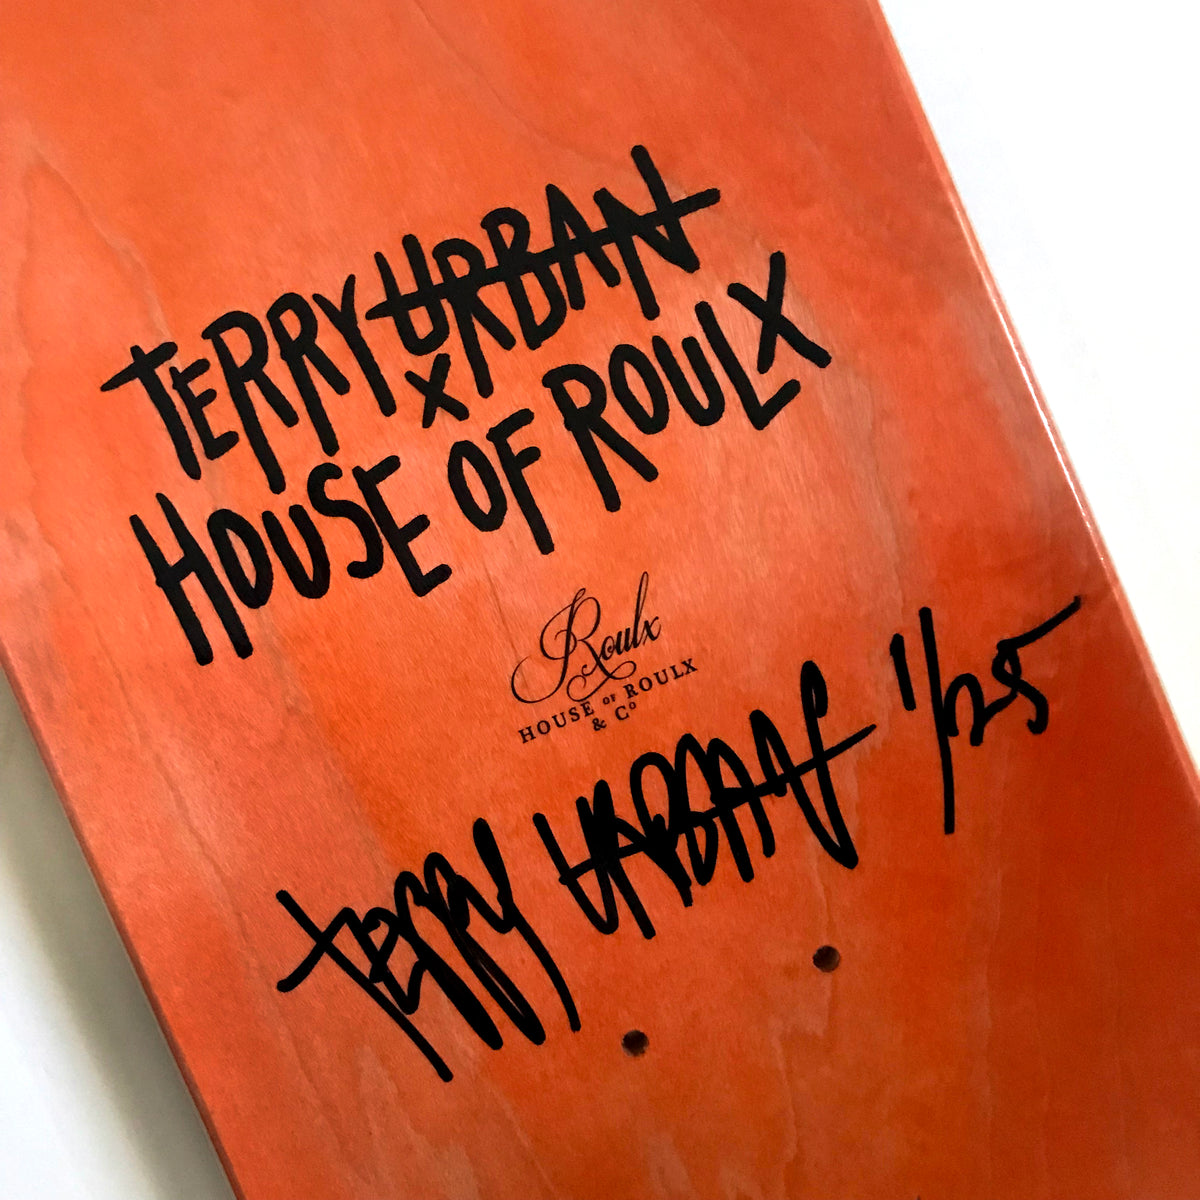 Terry Urban &quot;Hell or High Water II&quot; - Skate Deck &amp; Print Bundle, Hand-Embellished Edition of 25